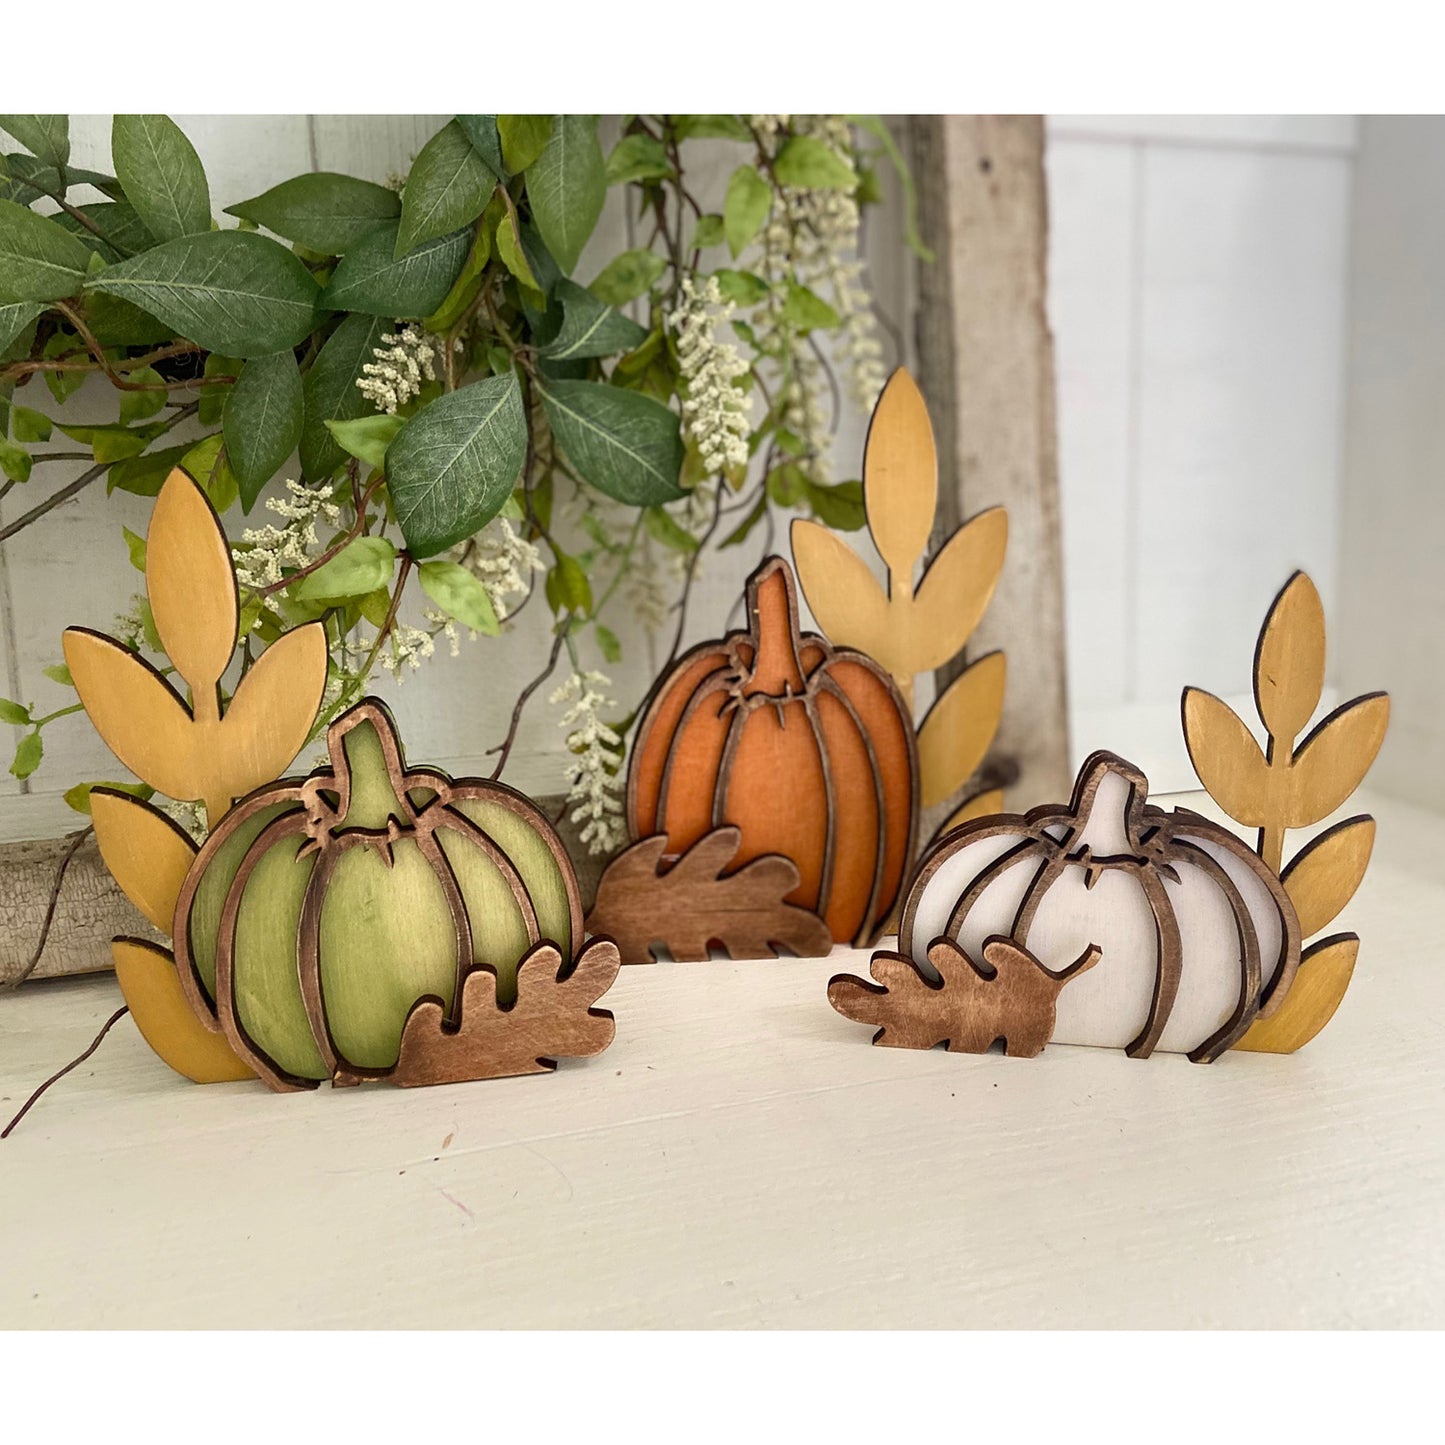 Chunky Pumpkin Shelf Sitters with Wheat and Leaves Fall Décor (Set of 3)